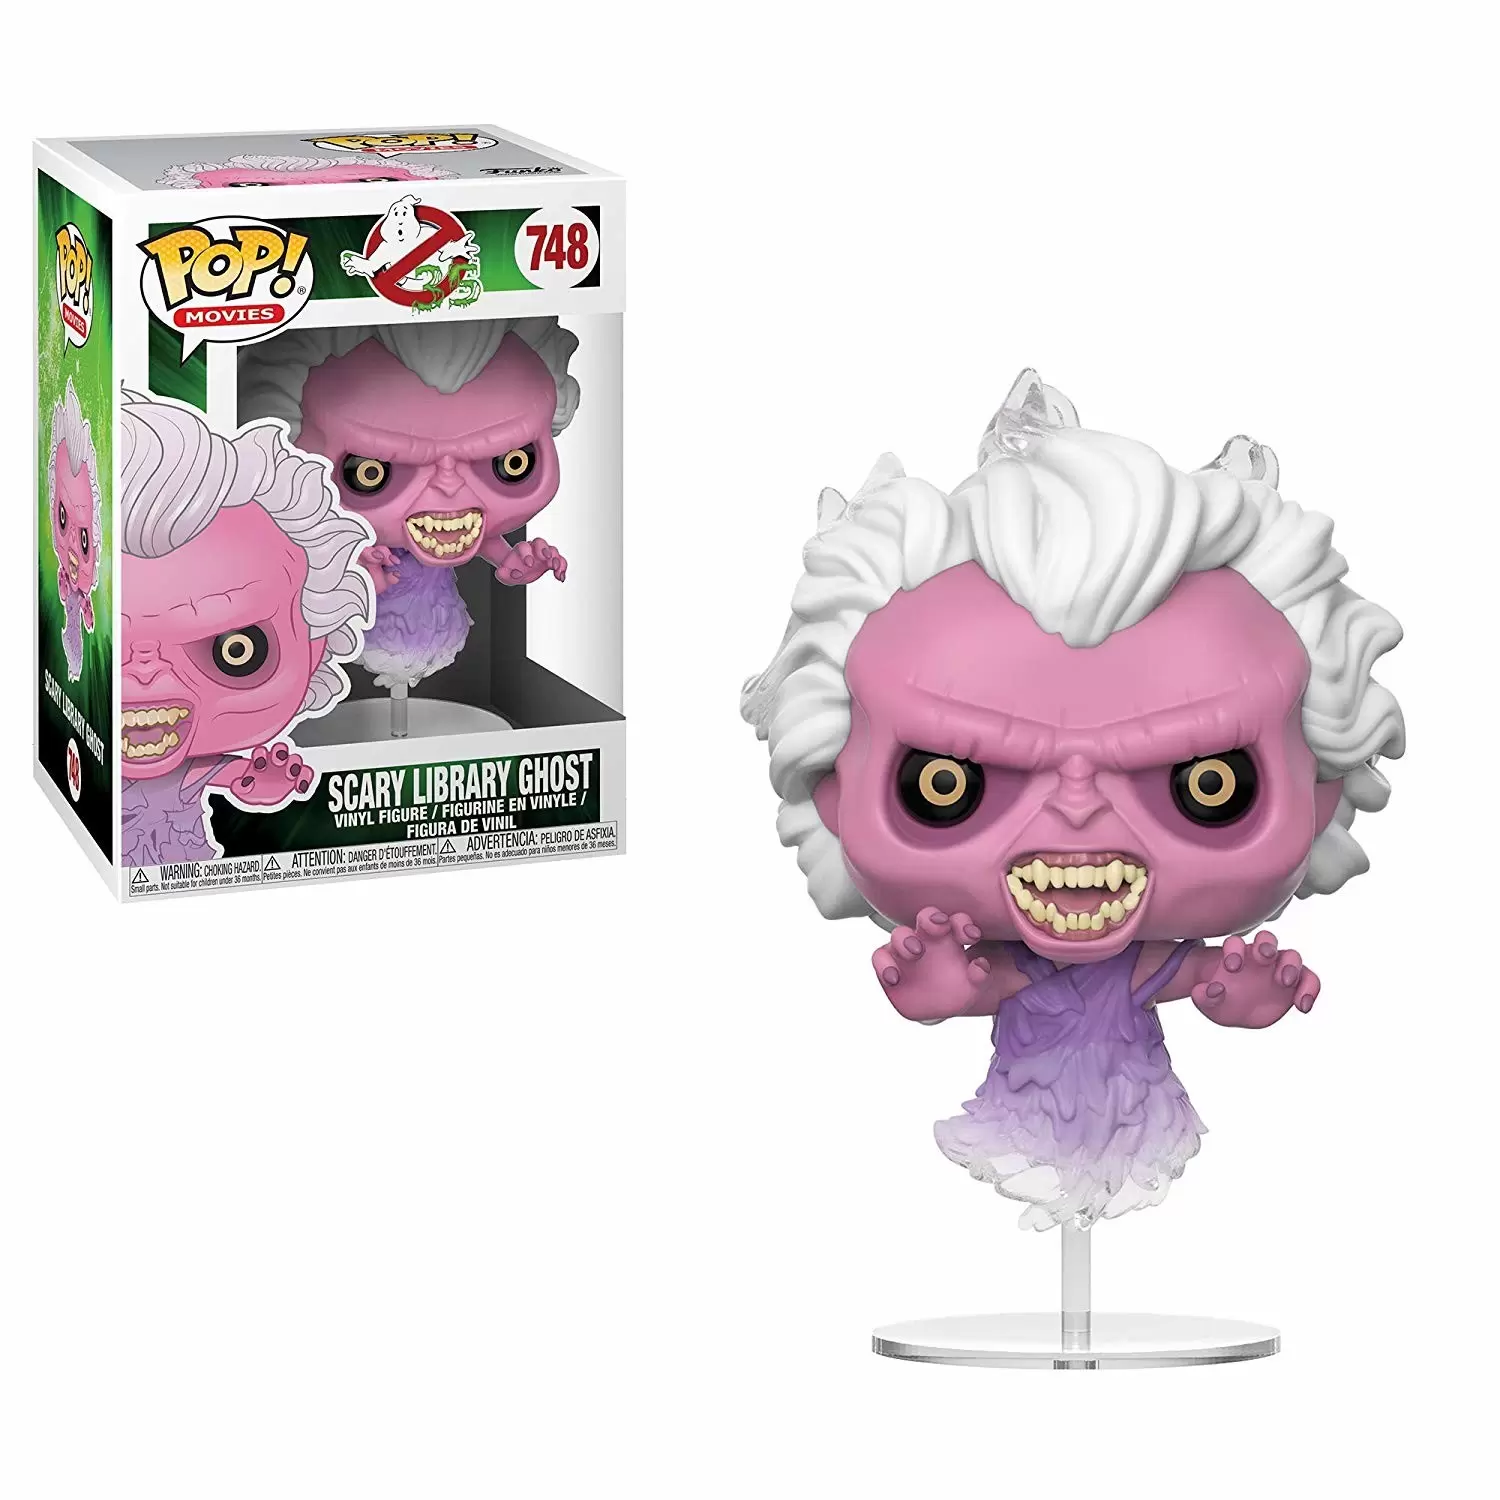 POP! Movies - Ghostbusters - Scary Library Ghost